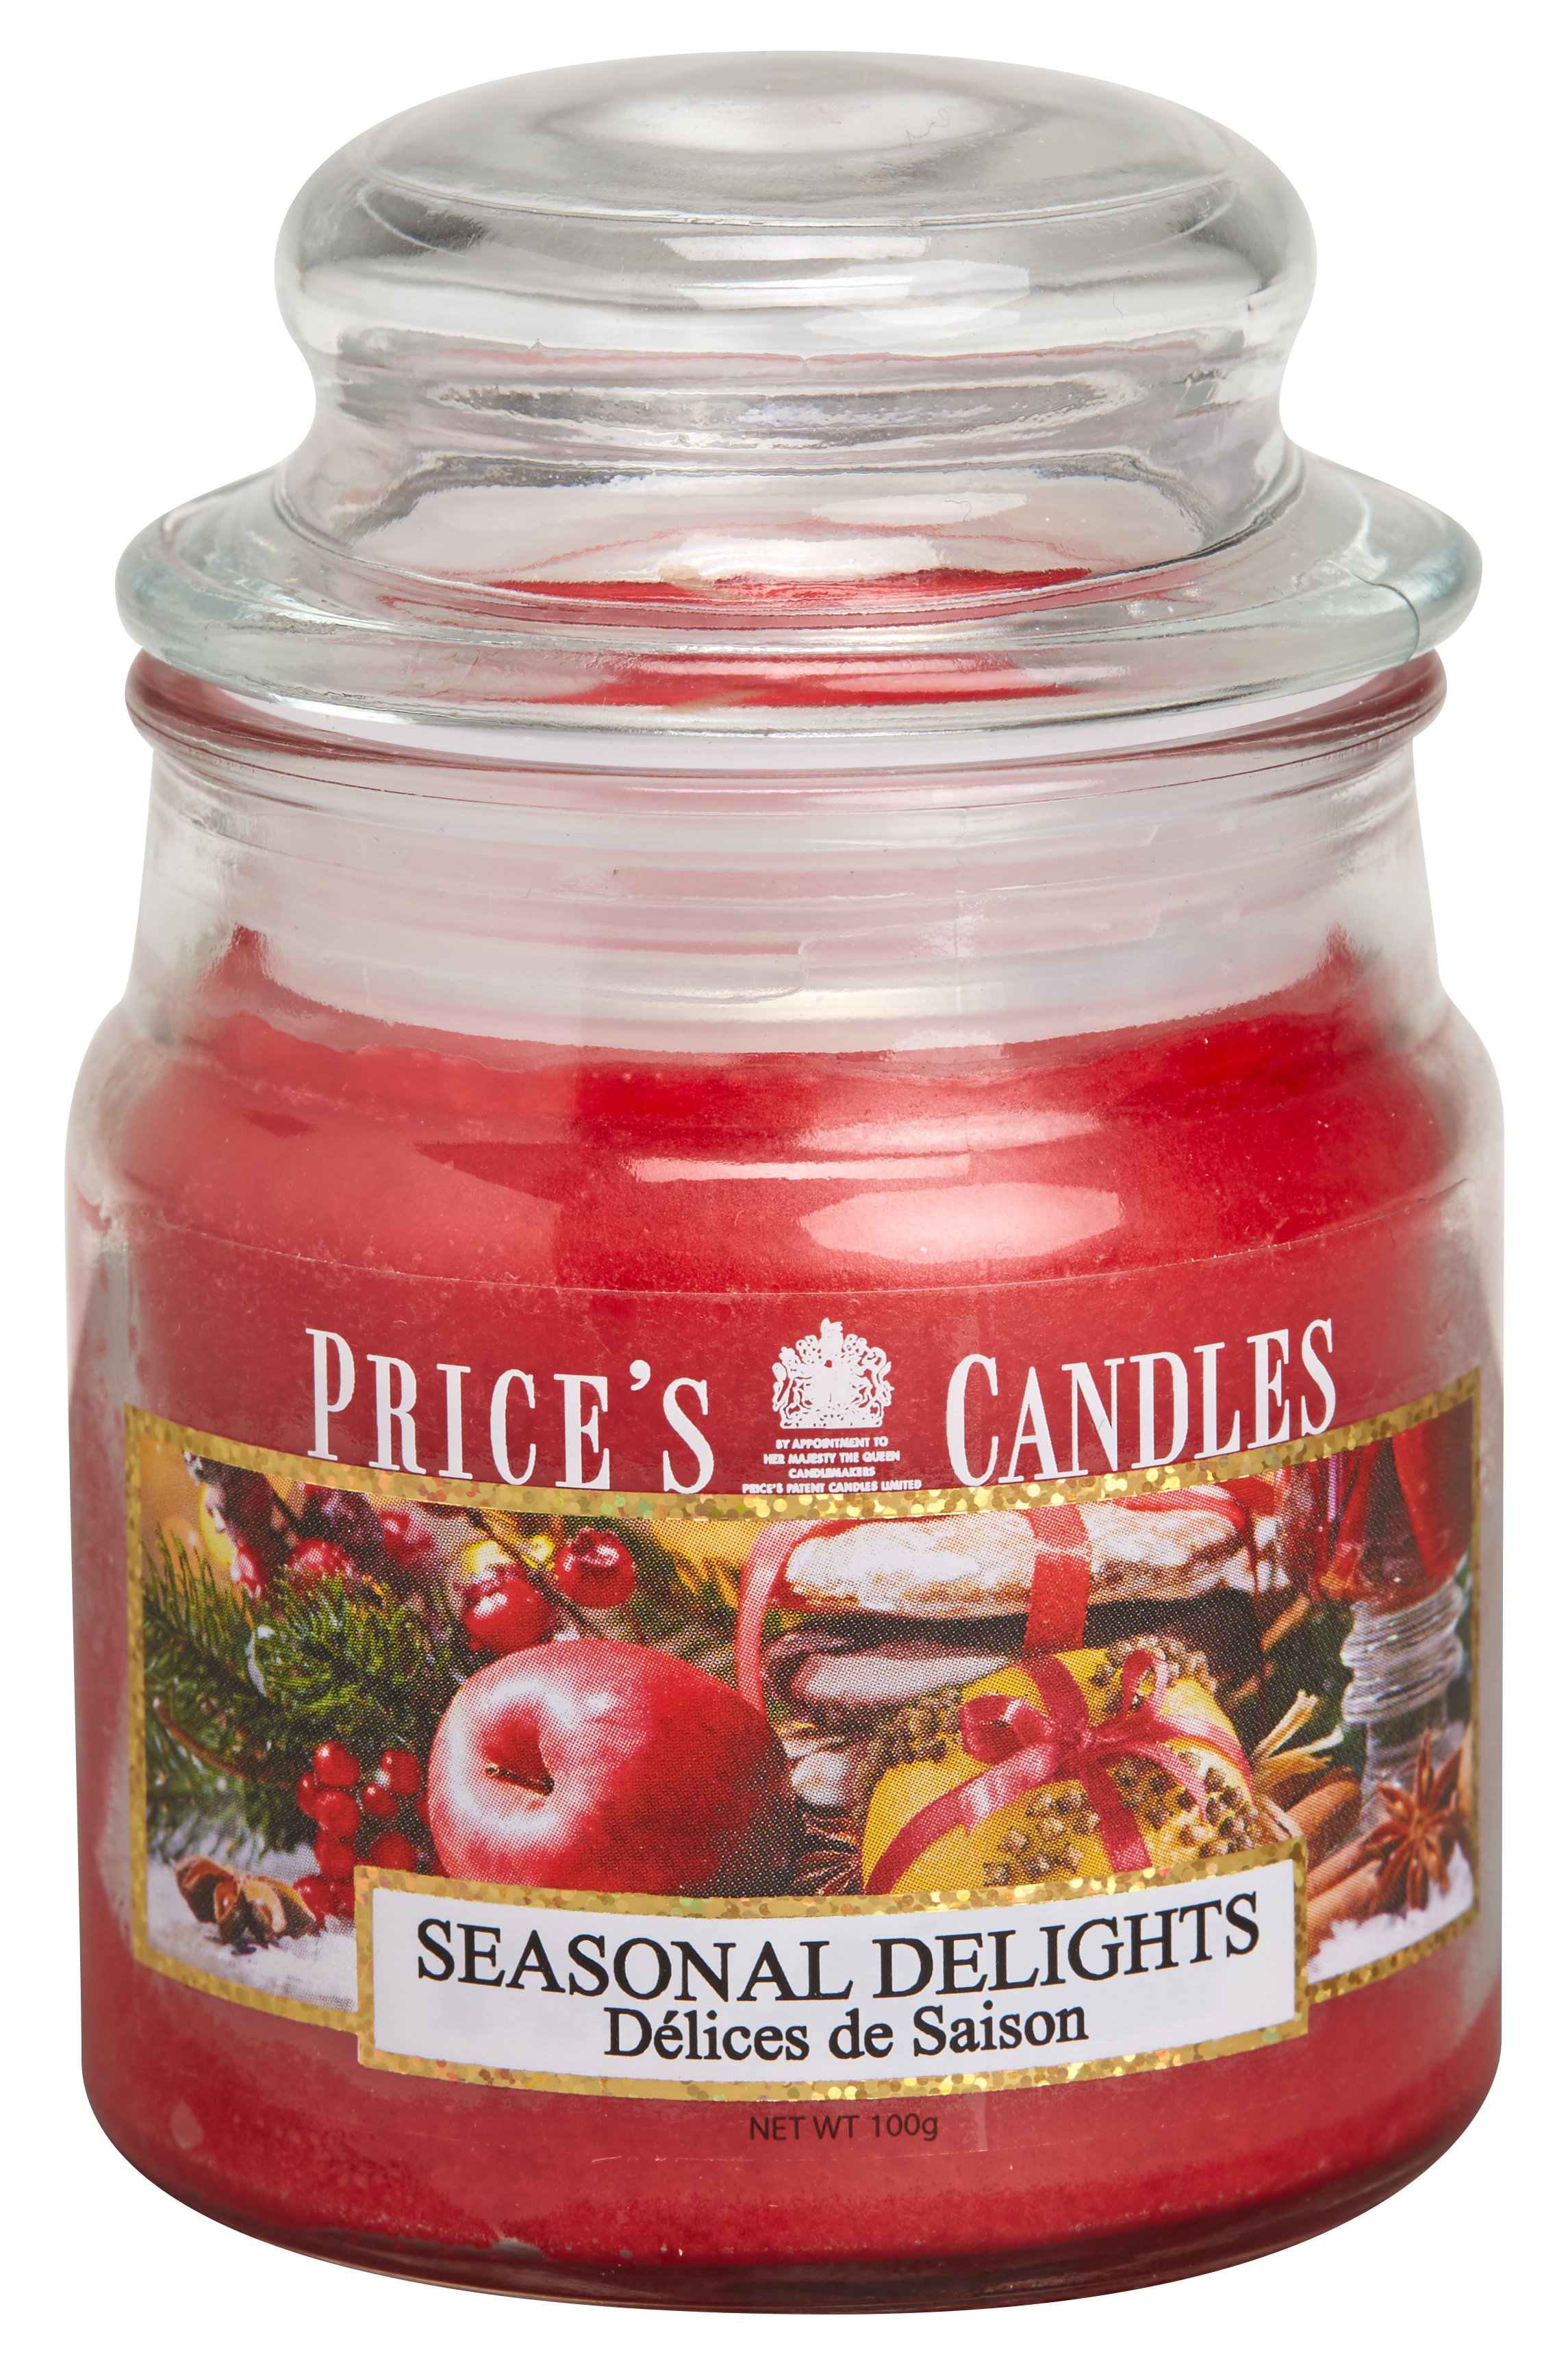 Prices Candle "Seasonal Delights" 100g 